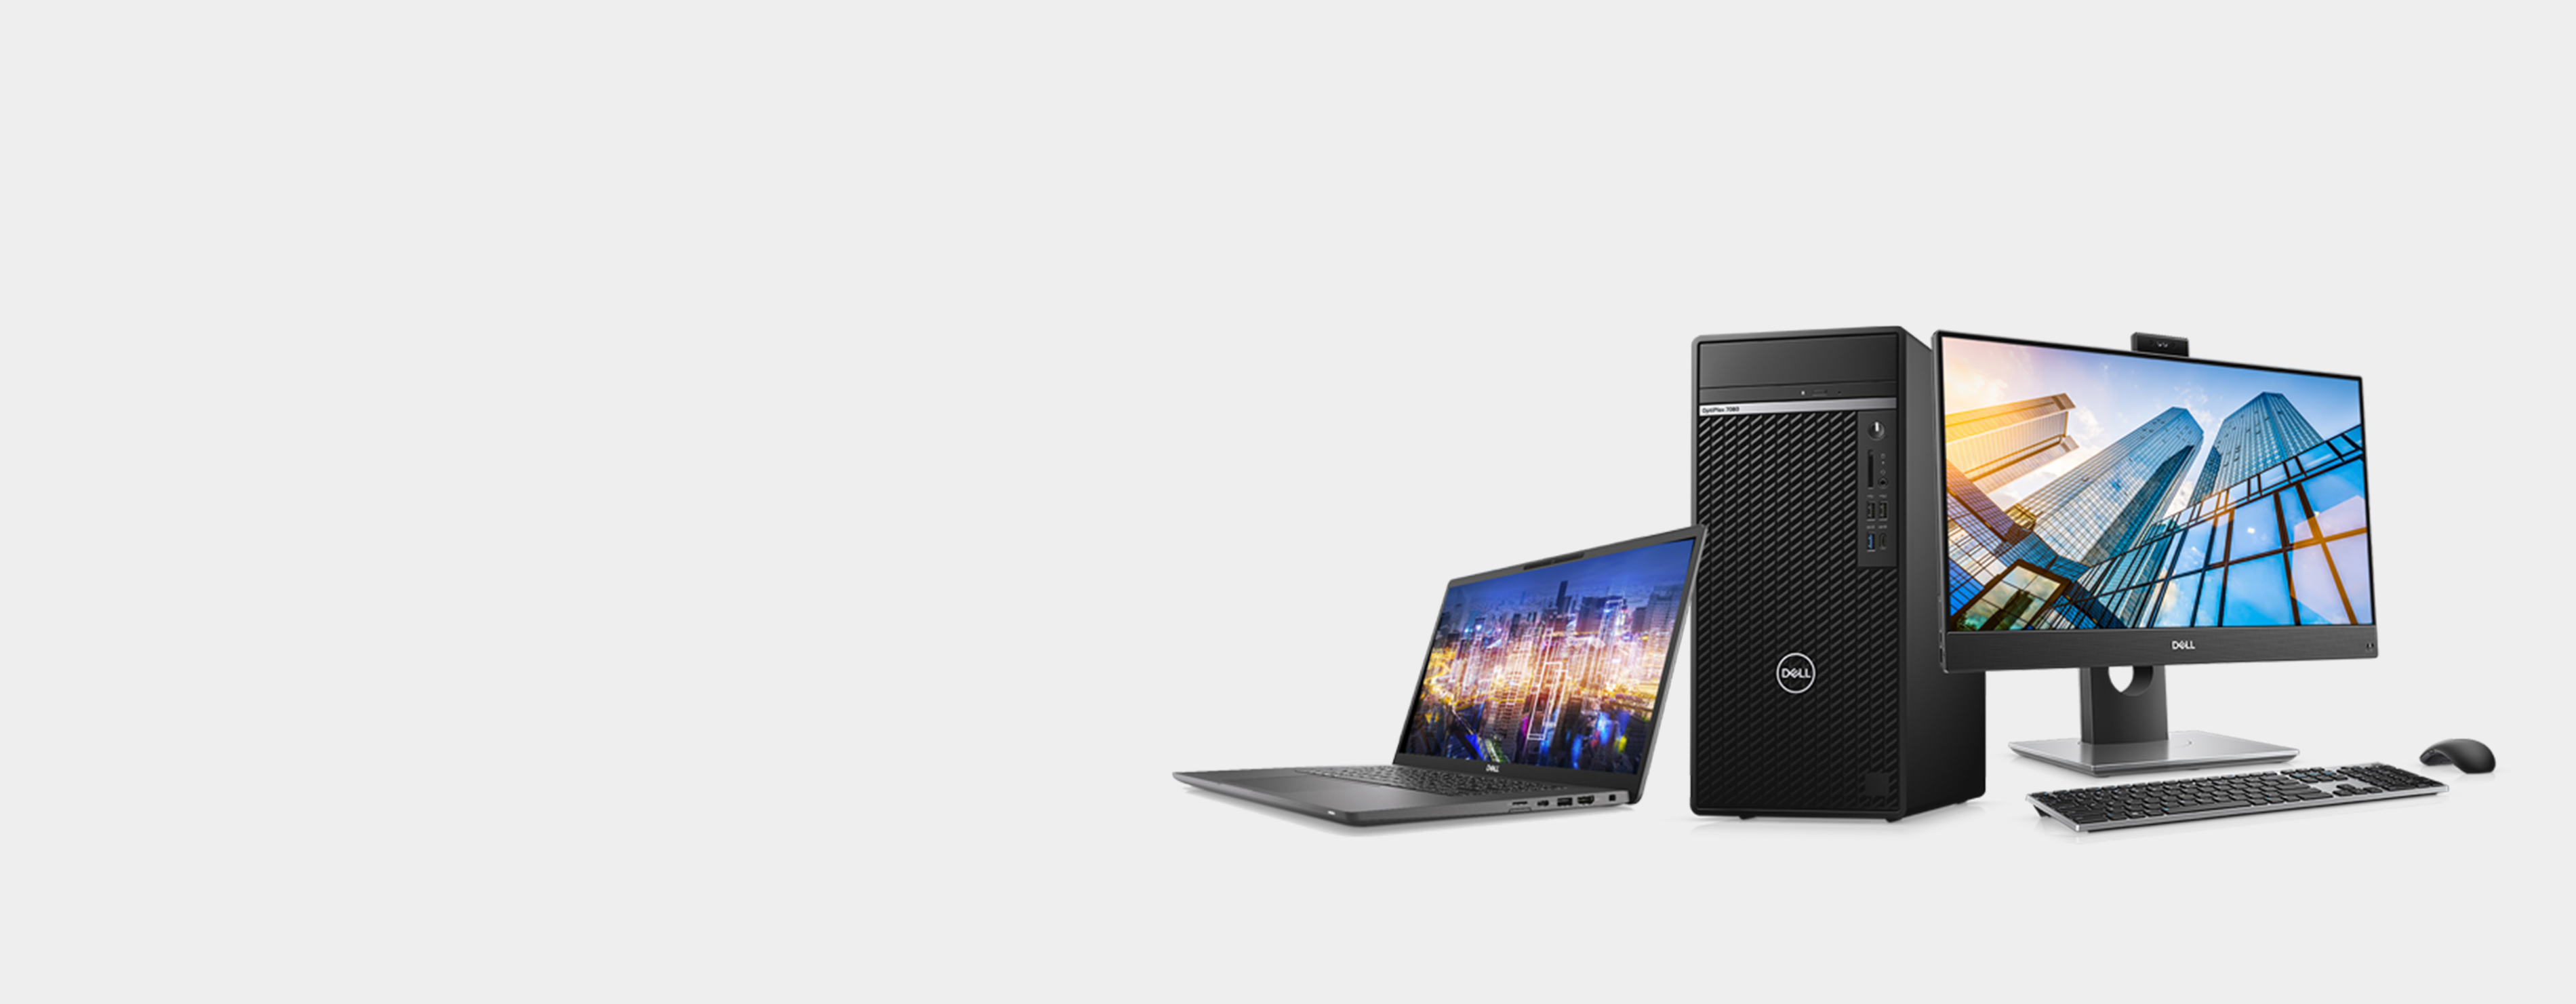 Dell Latitude 7320 Detachable: "A tablet-style 2-in-1 laptop with a snap-on keyboard." — T3